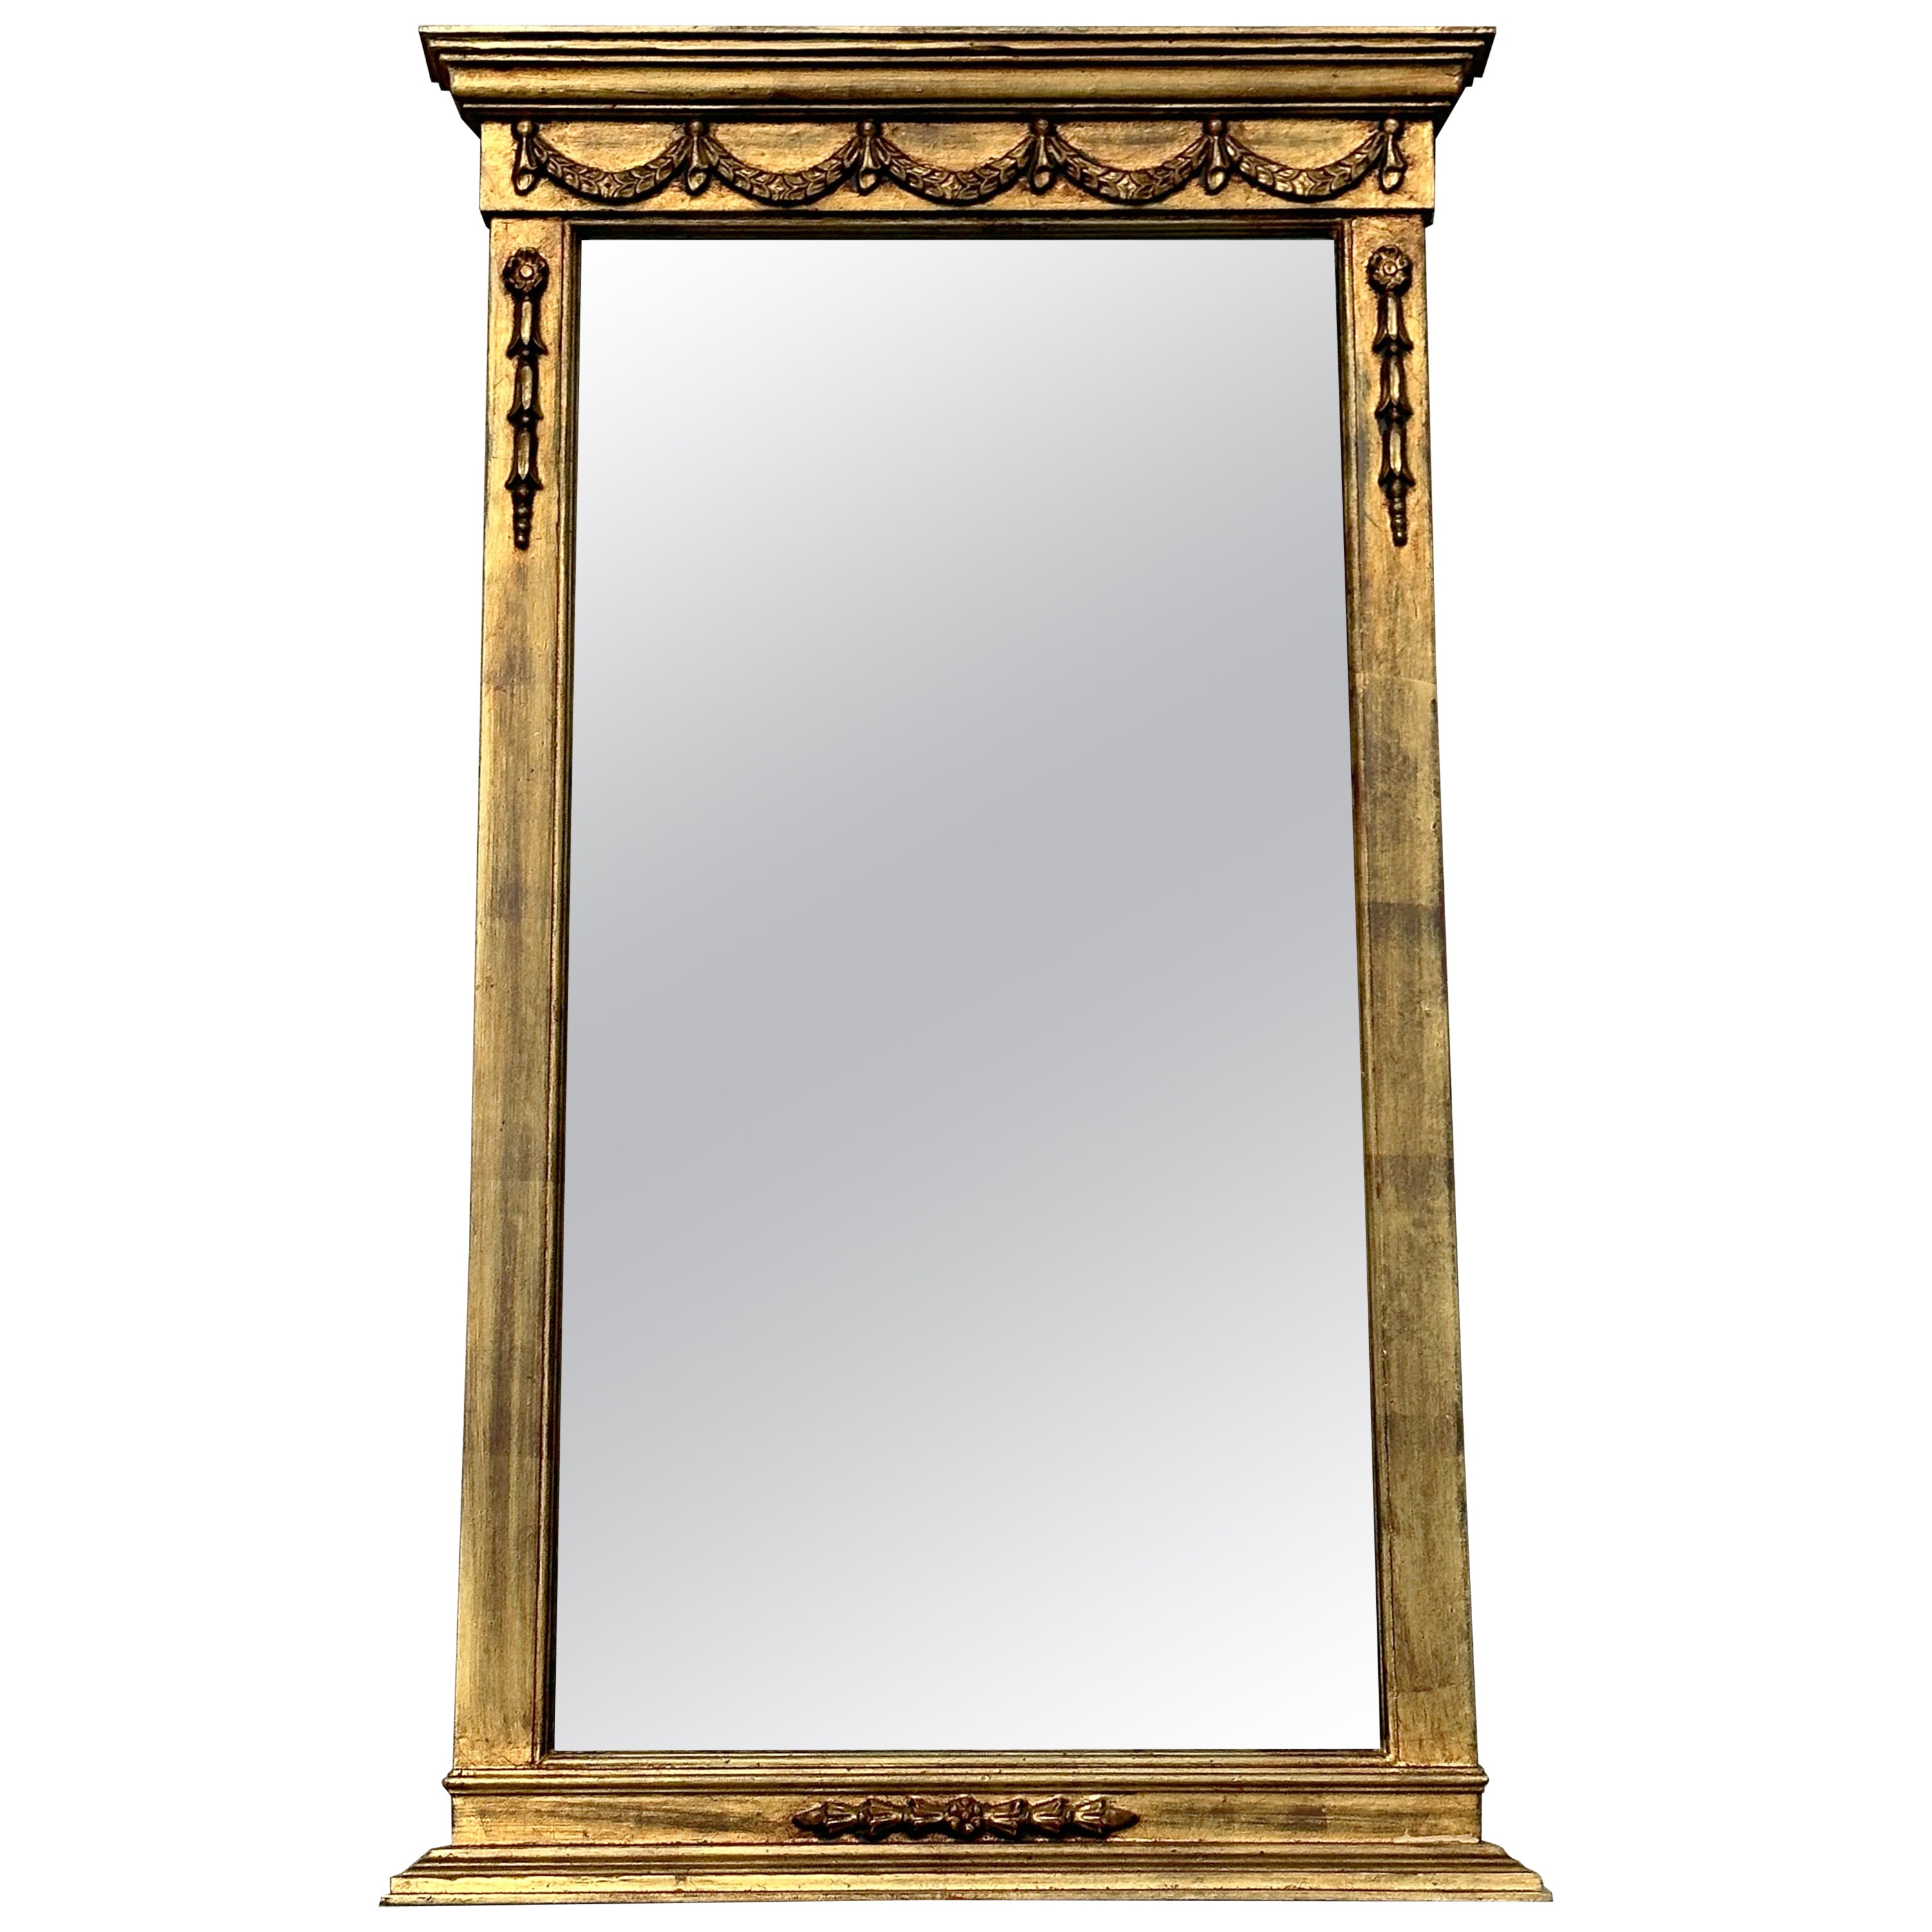 Vintage circa 1950s Gilt Framed Wall Mirror Stamped Made in Italy to the Rear